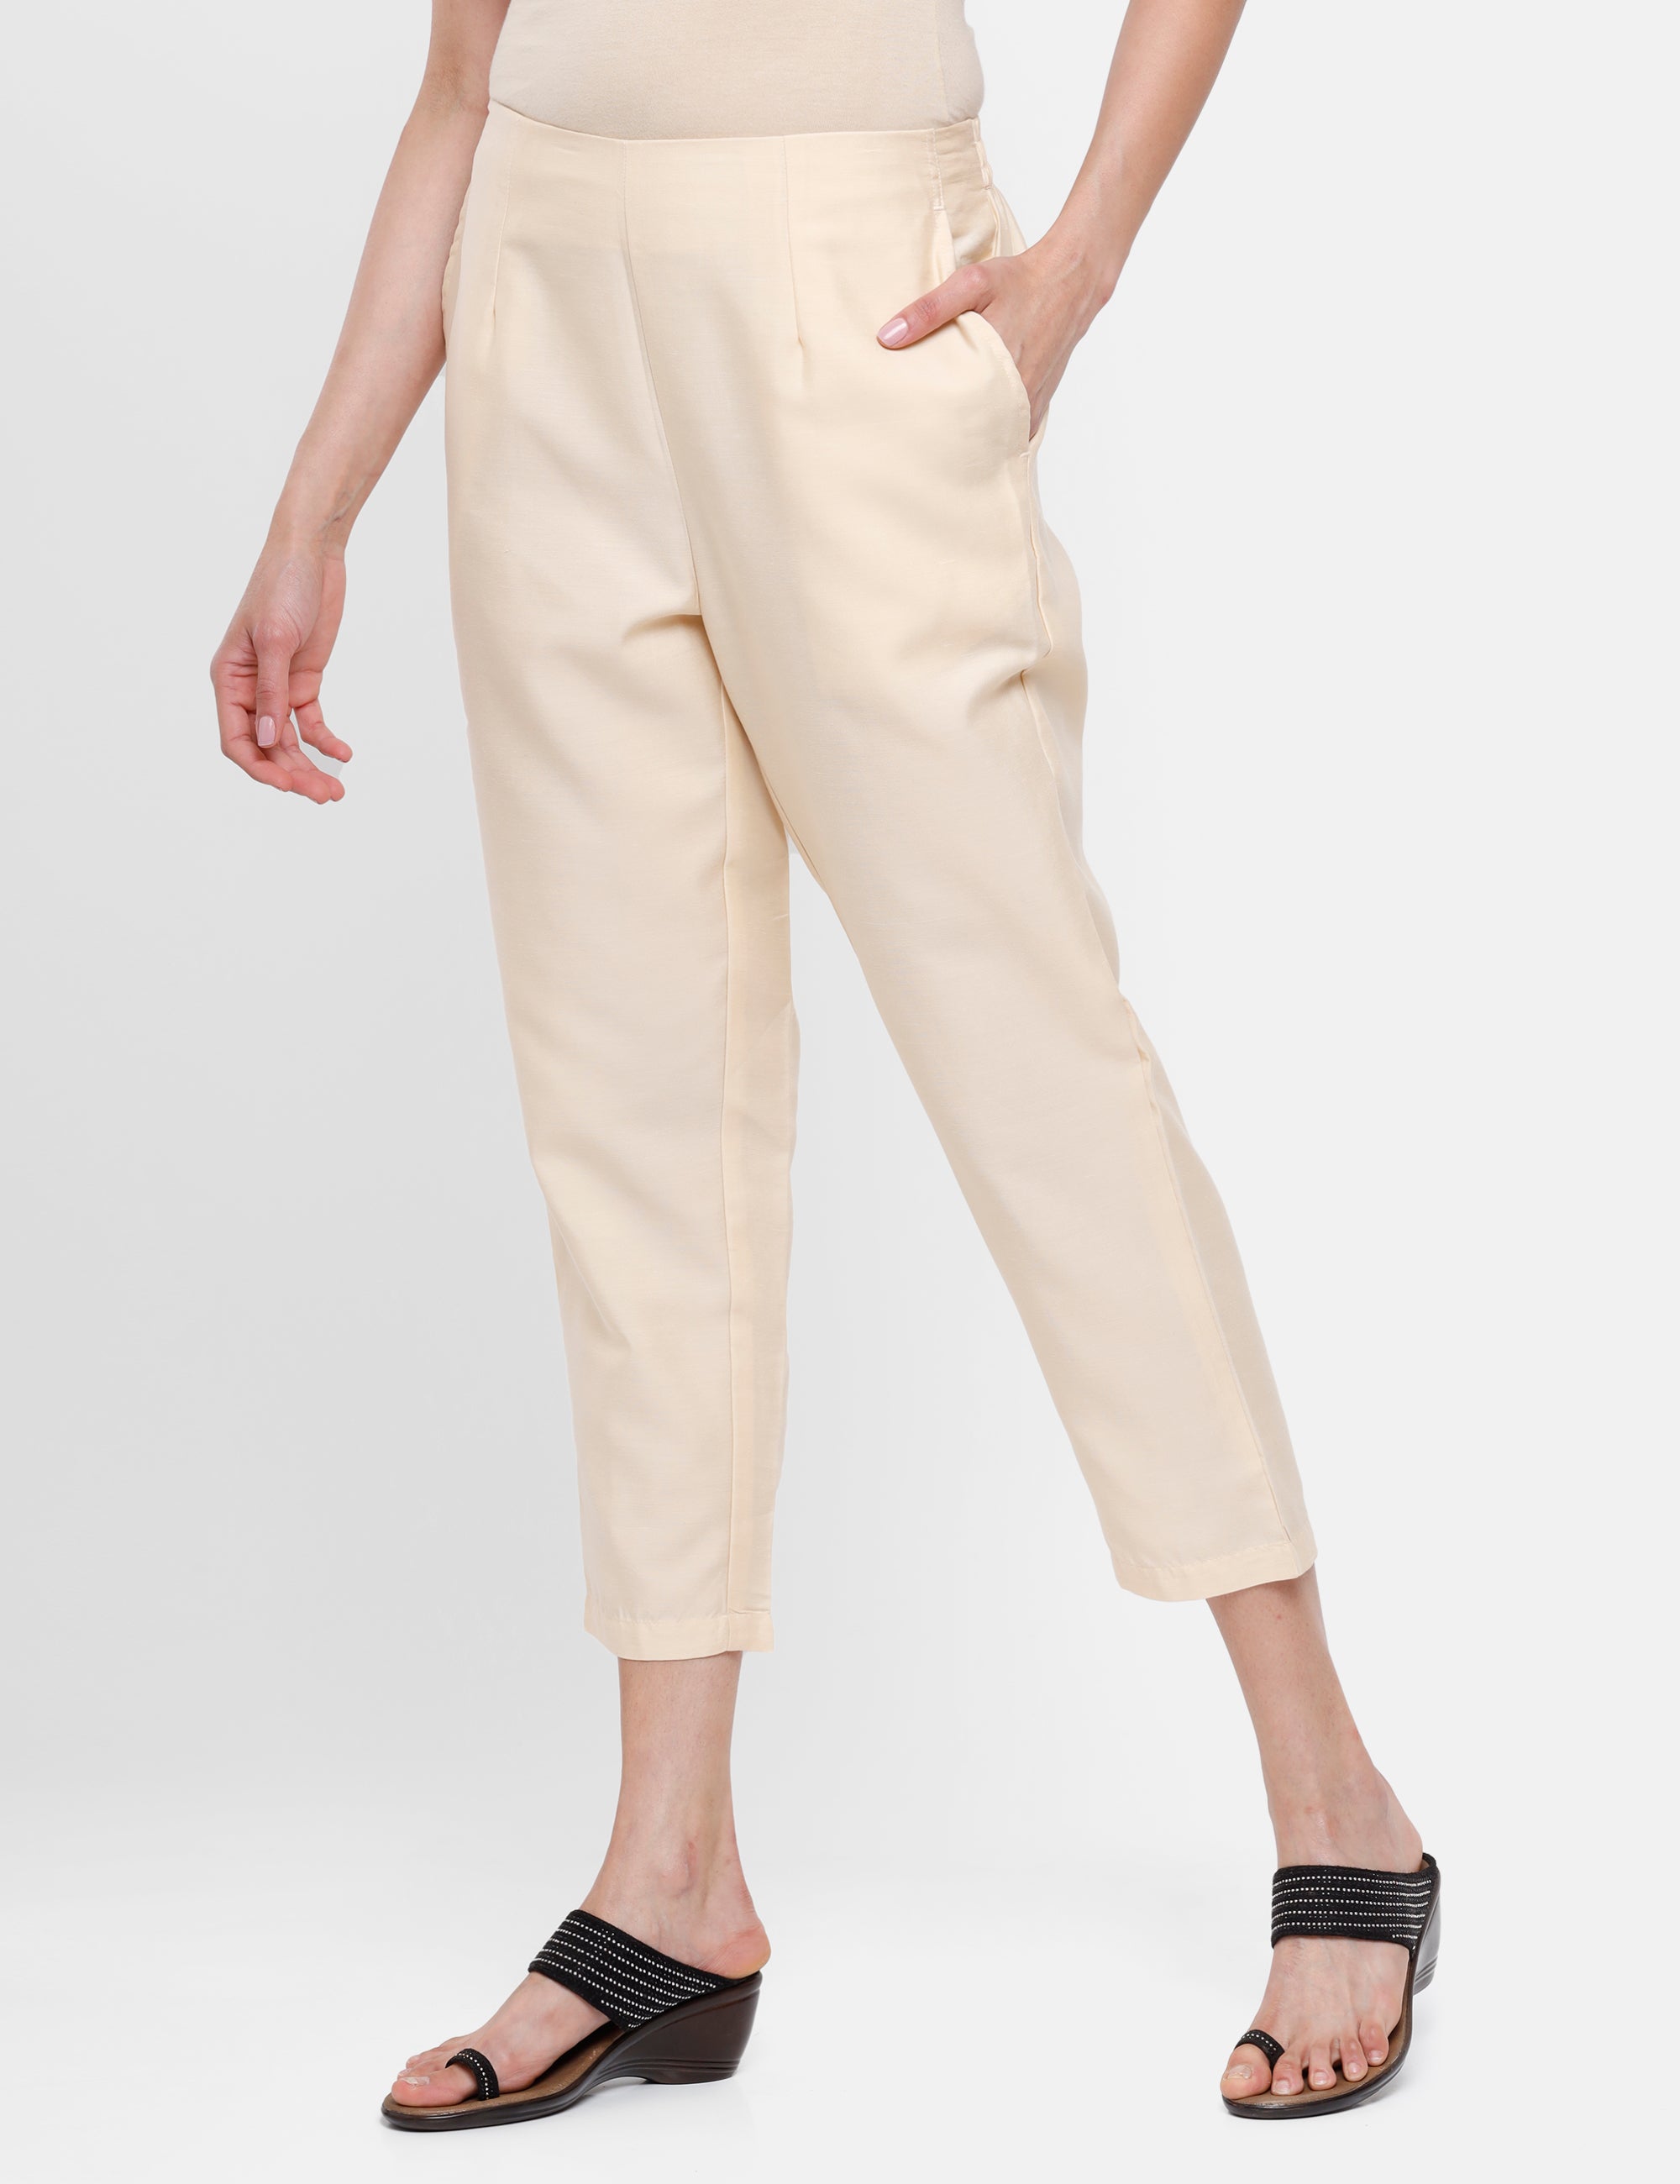 MARKS & SPENCER Slim Fit Women Beige Trousers - Buy MARKS & SPENCER Slim  Fit Women Beige Trousers Online at Best Prices in India | Flipkart.com